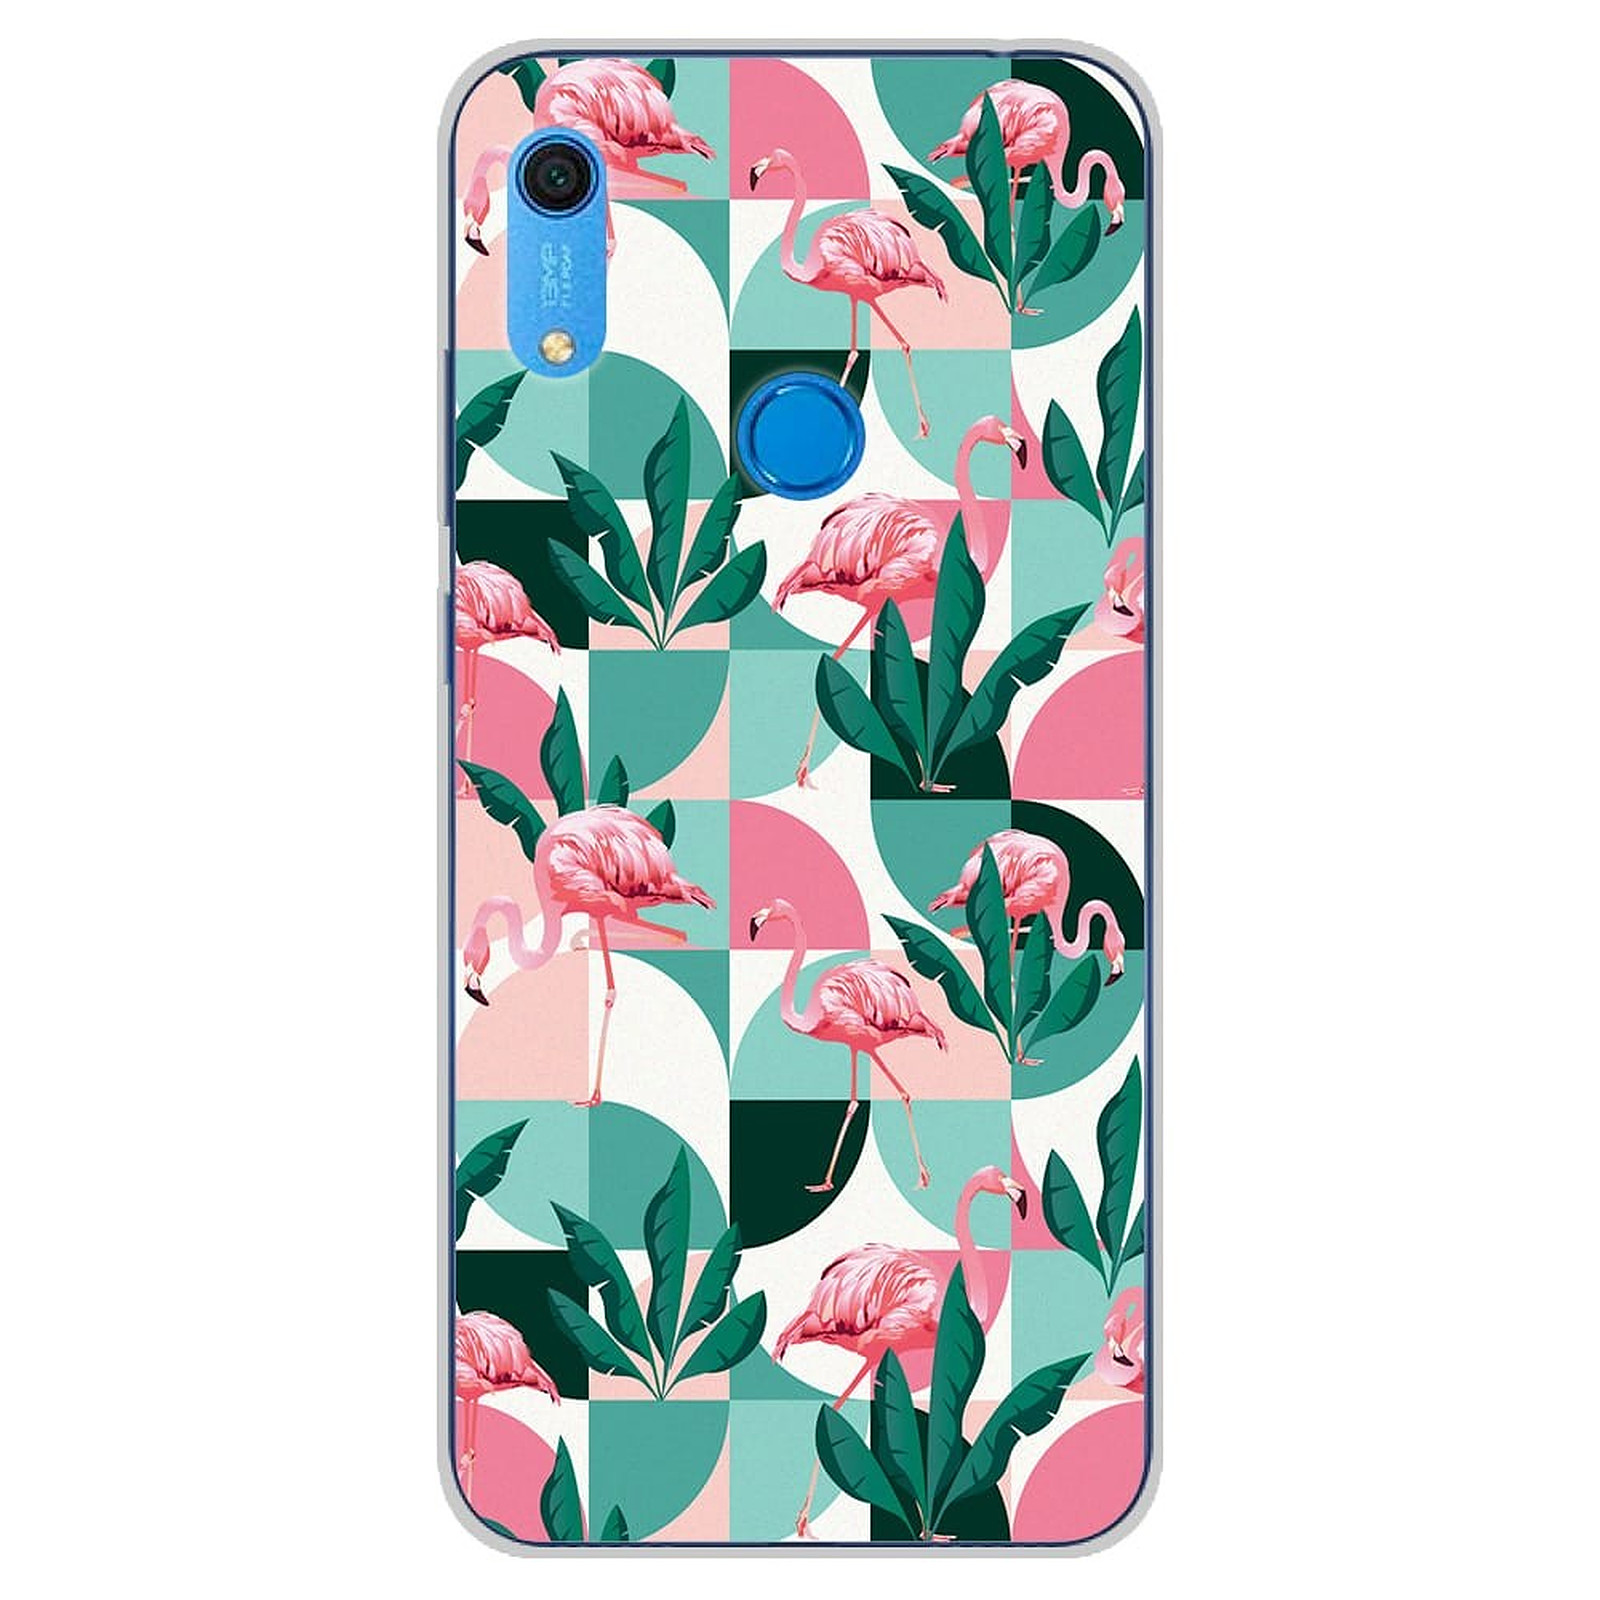 1001 Coques Coque silicone gel Huawei Y6S motif Flamants Roses ge´ome´trique - Coque telephone 1001Coques